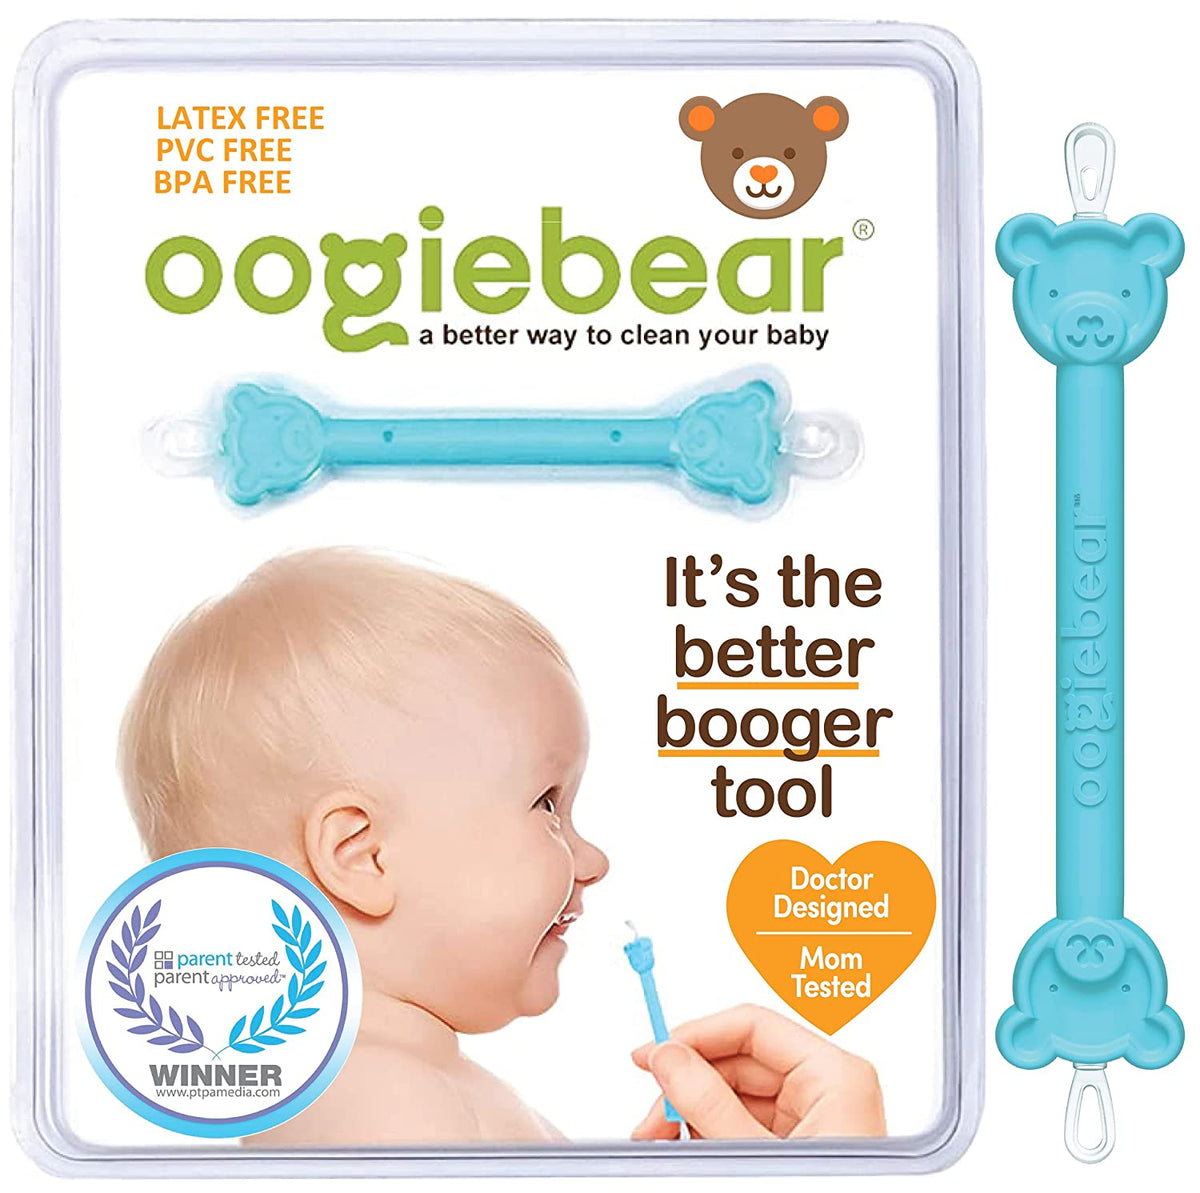 Oogiebear 2-Pack Infant Nose & Ear Cleaner with Case in Orange